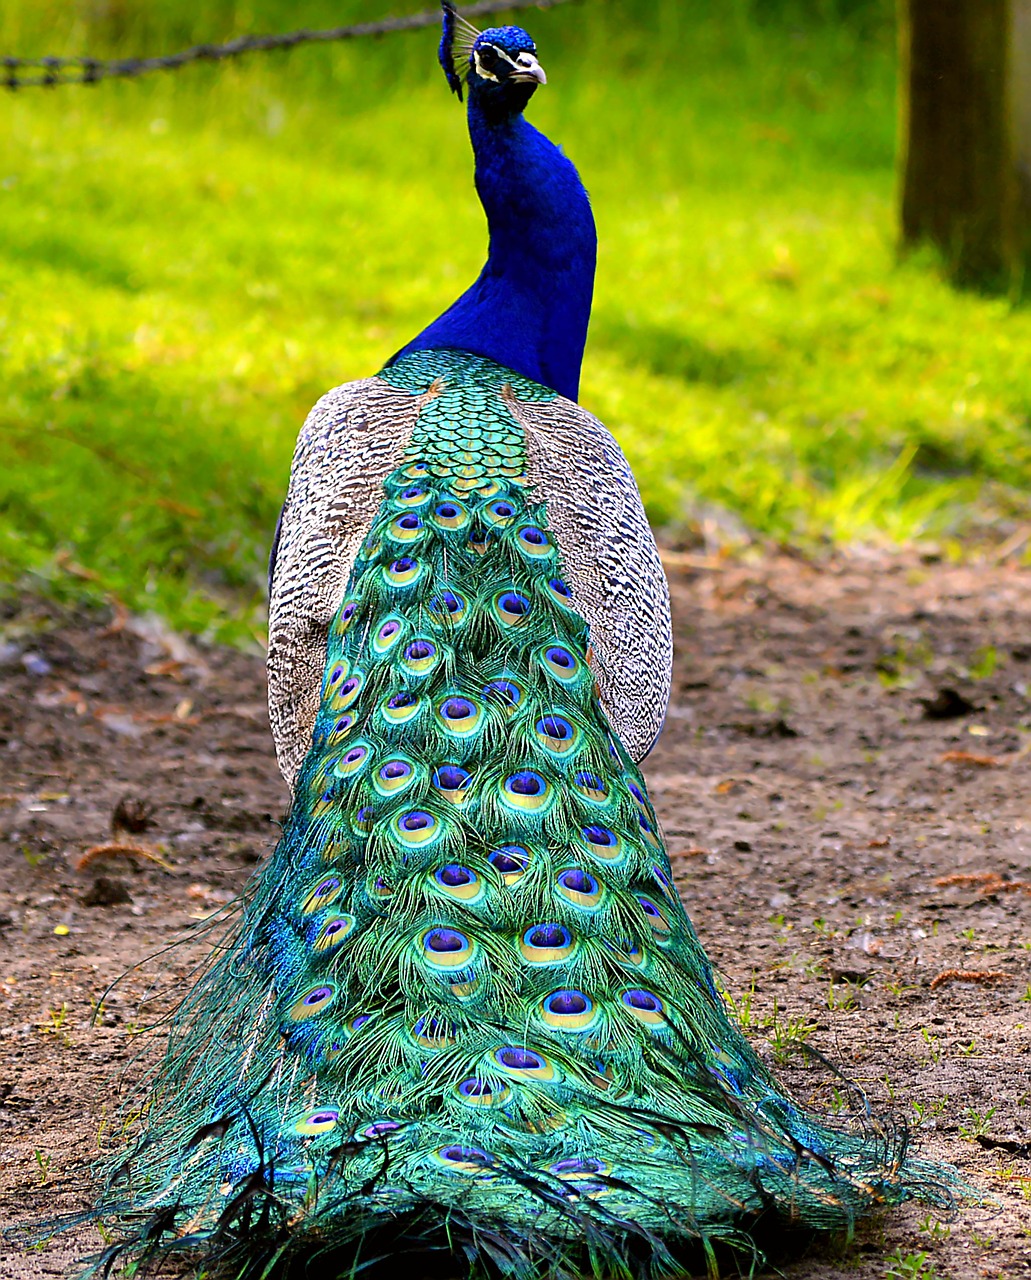 Image - peacock colorful feather blue